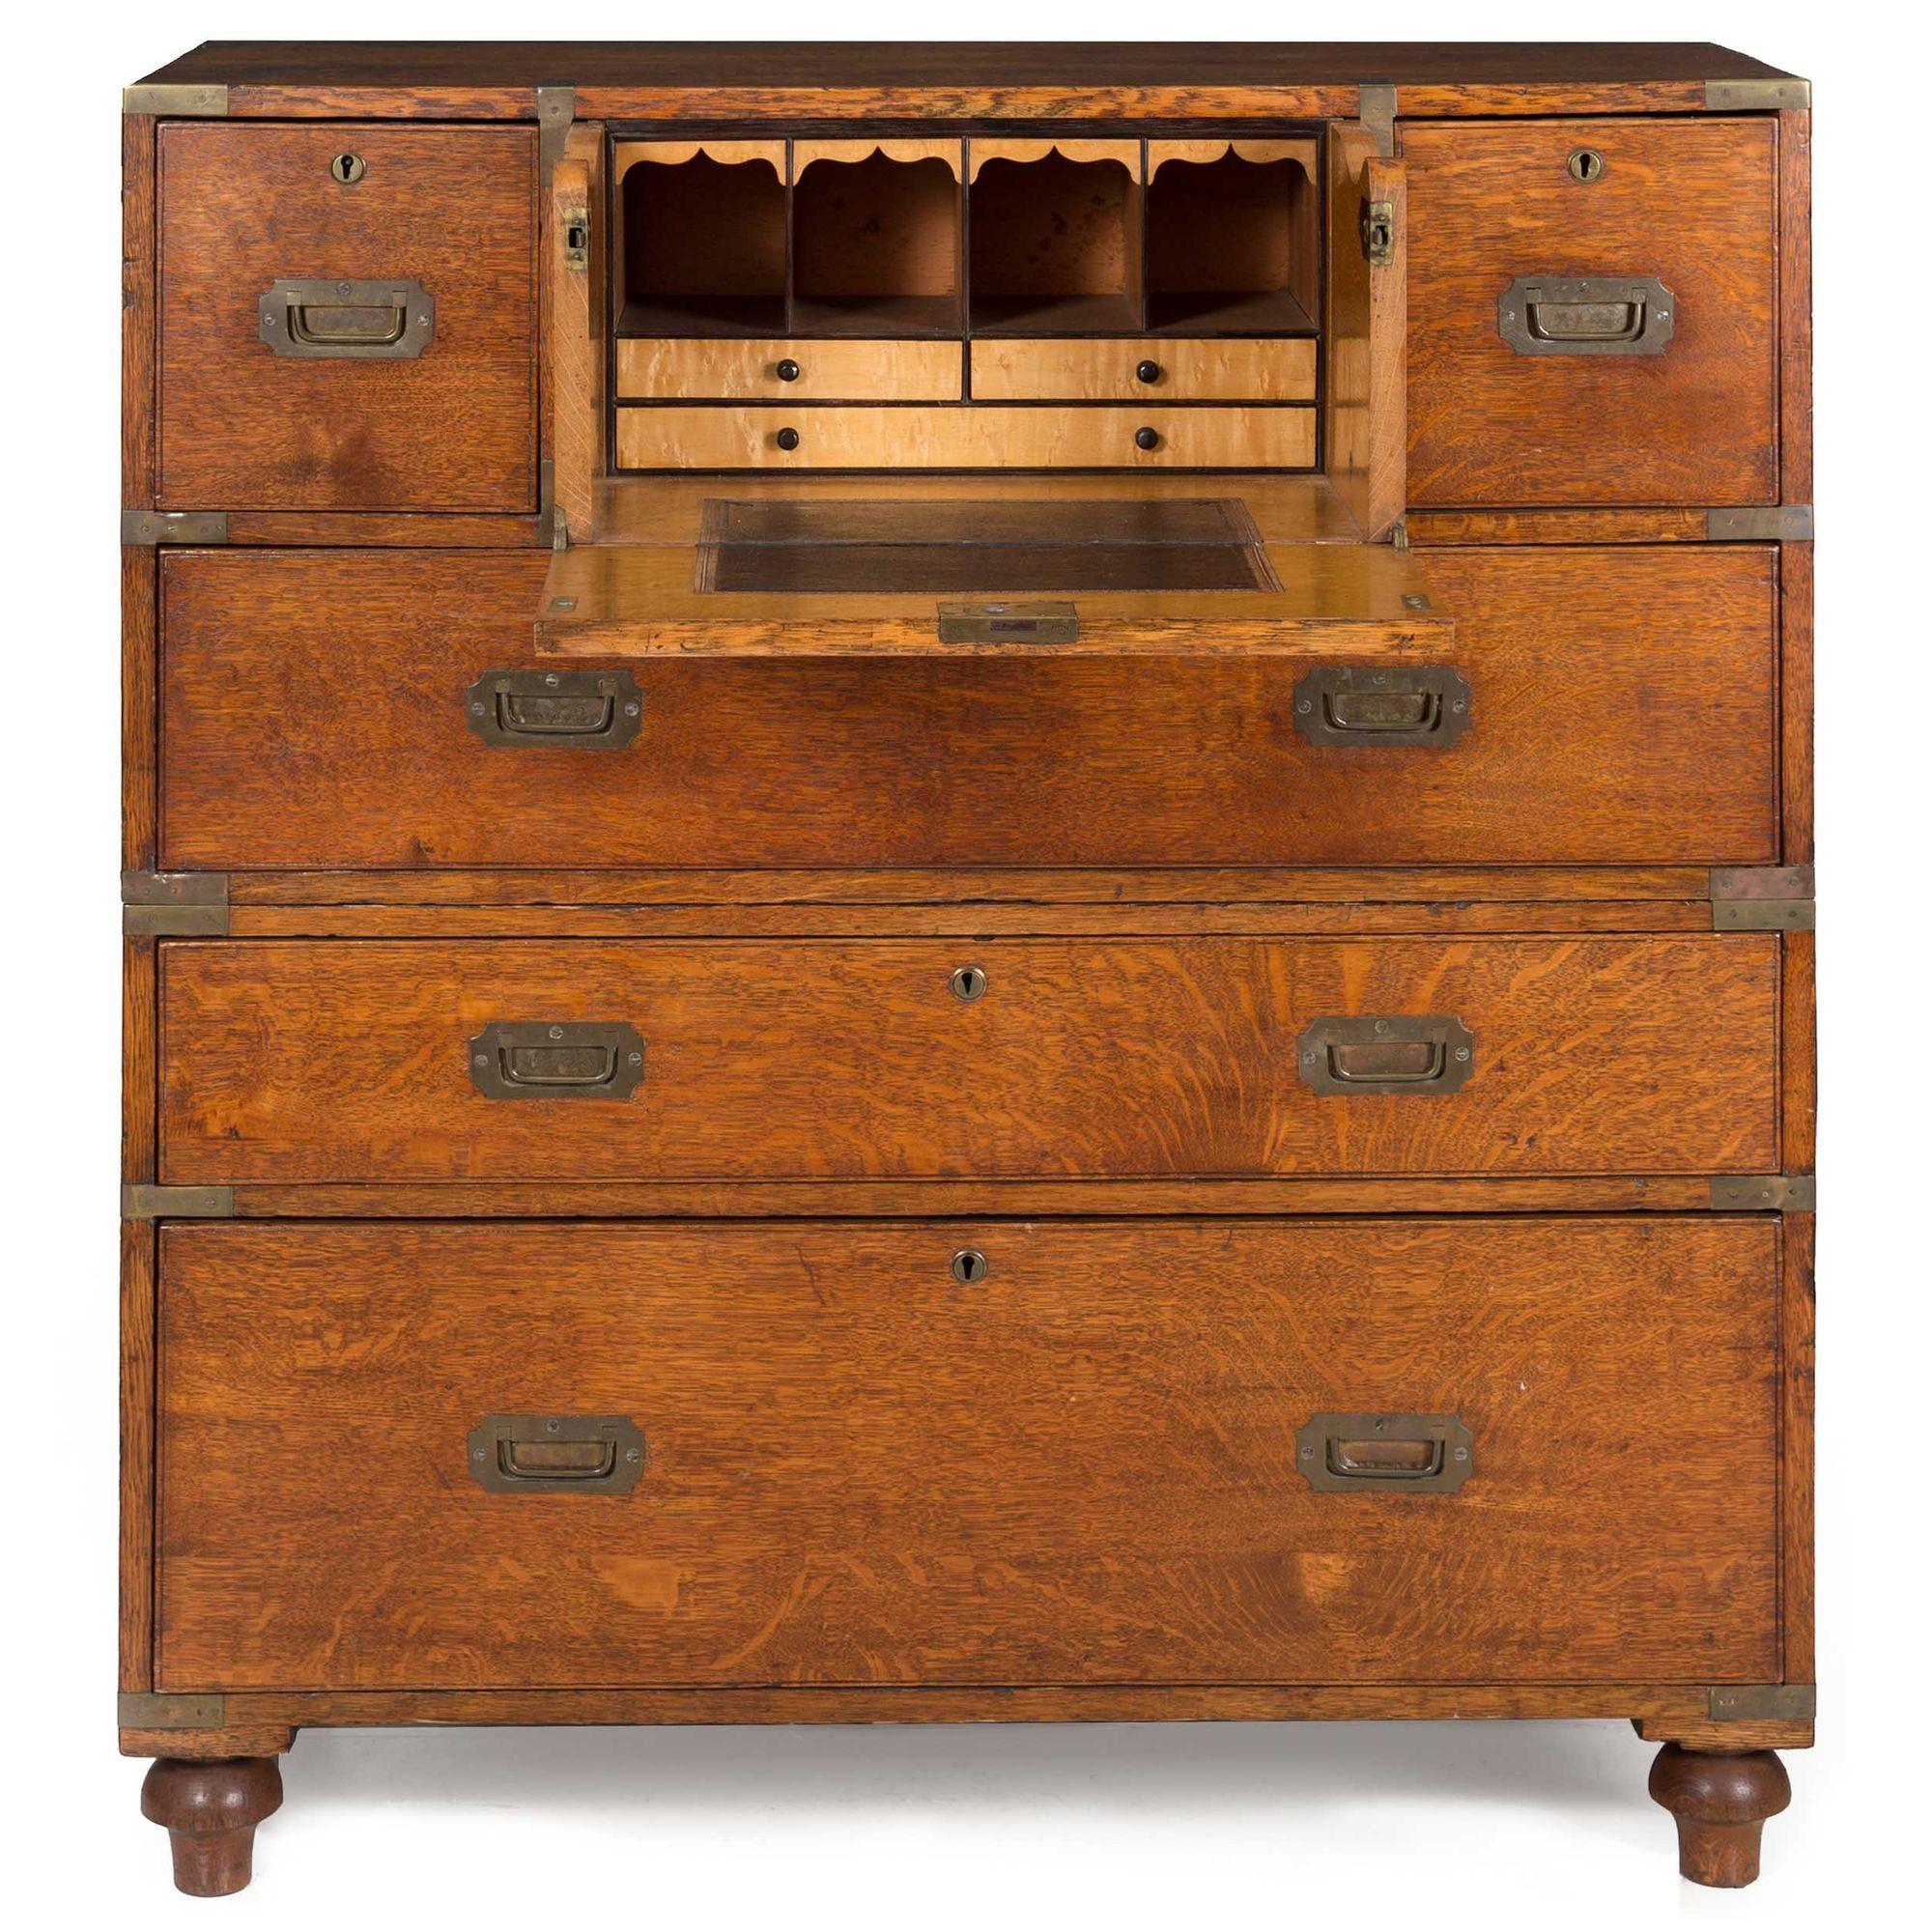 British Antique Campaign Chest of Drawers with Desk, 19th Century 7